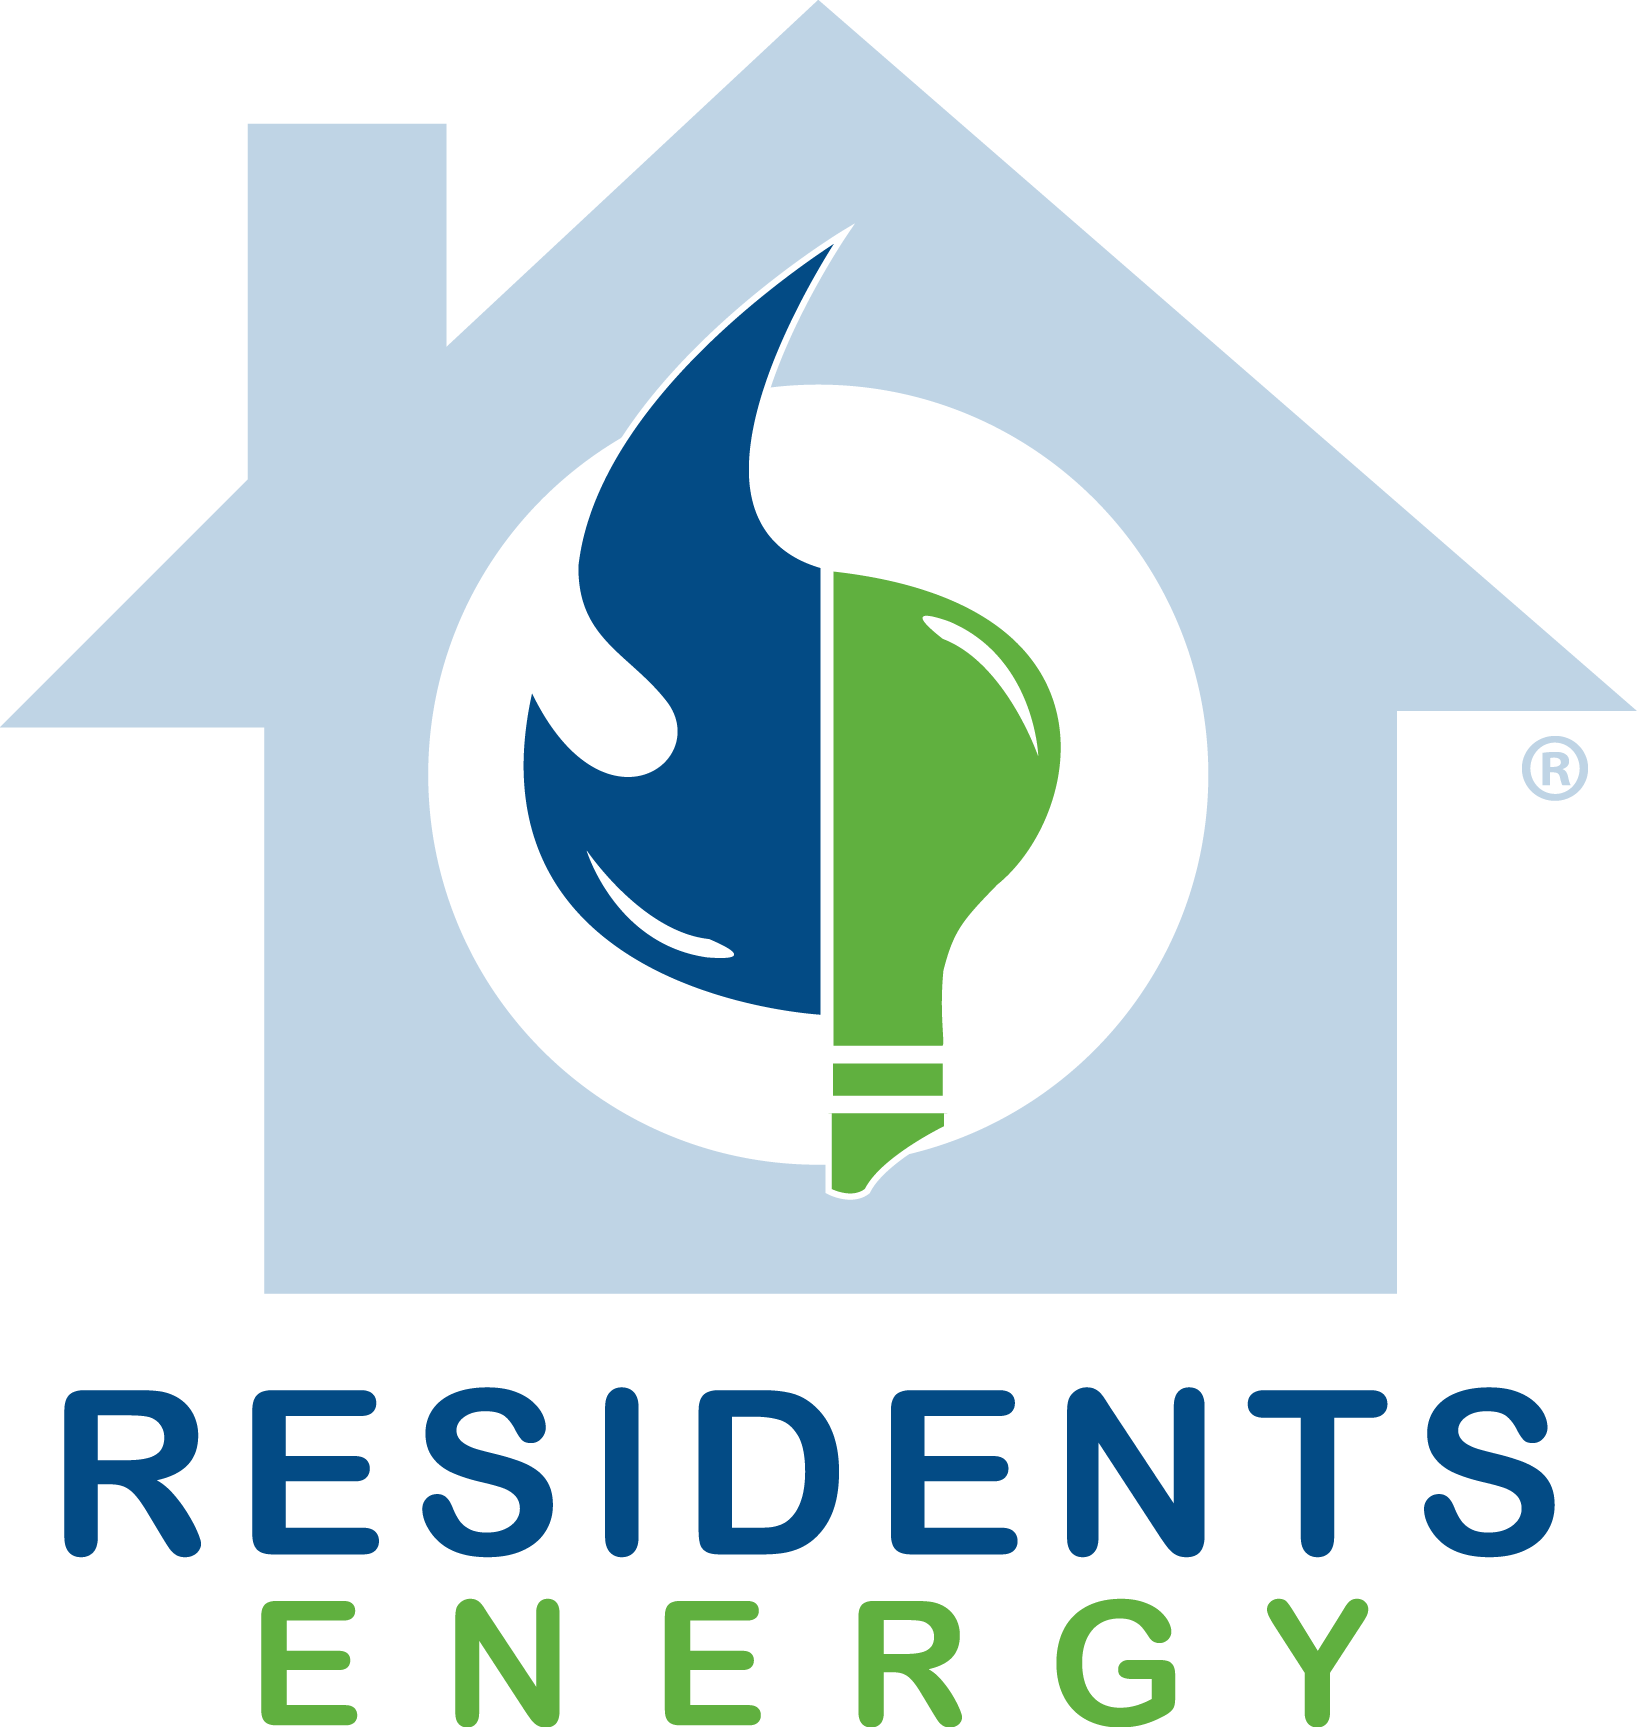 Click to see details for Residents Energy, LLC offer. Price 0.825